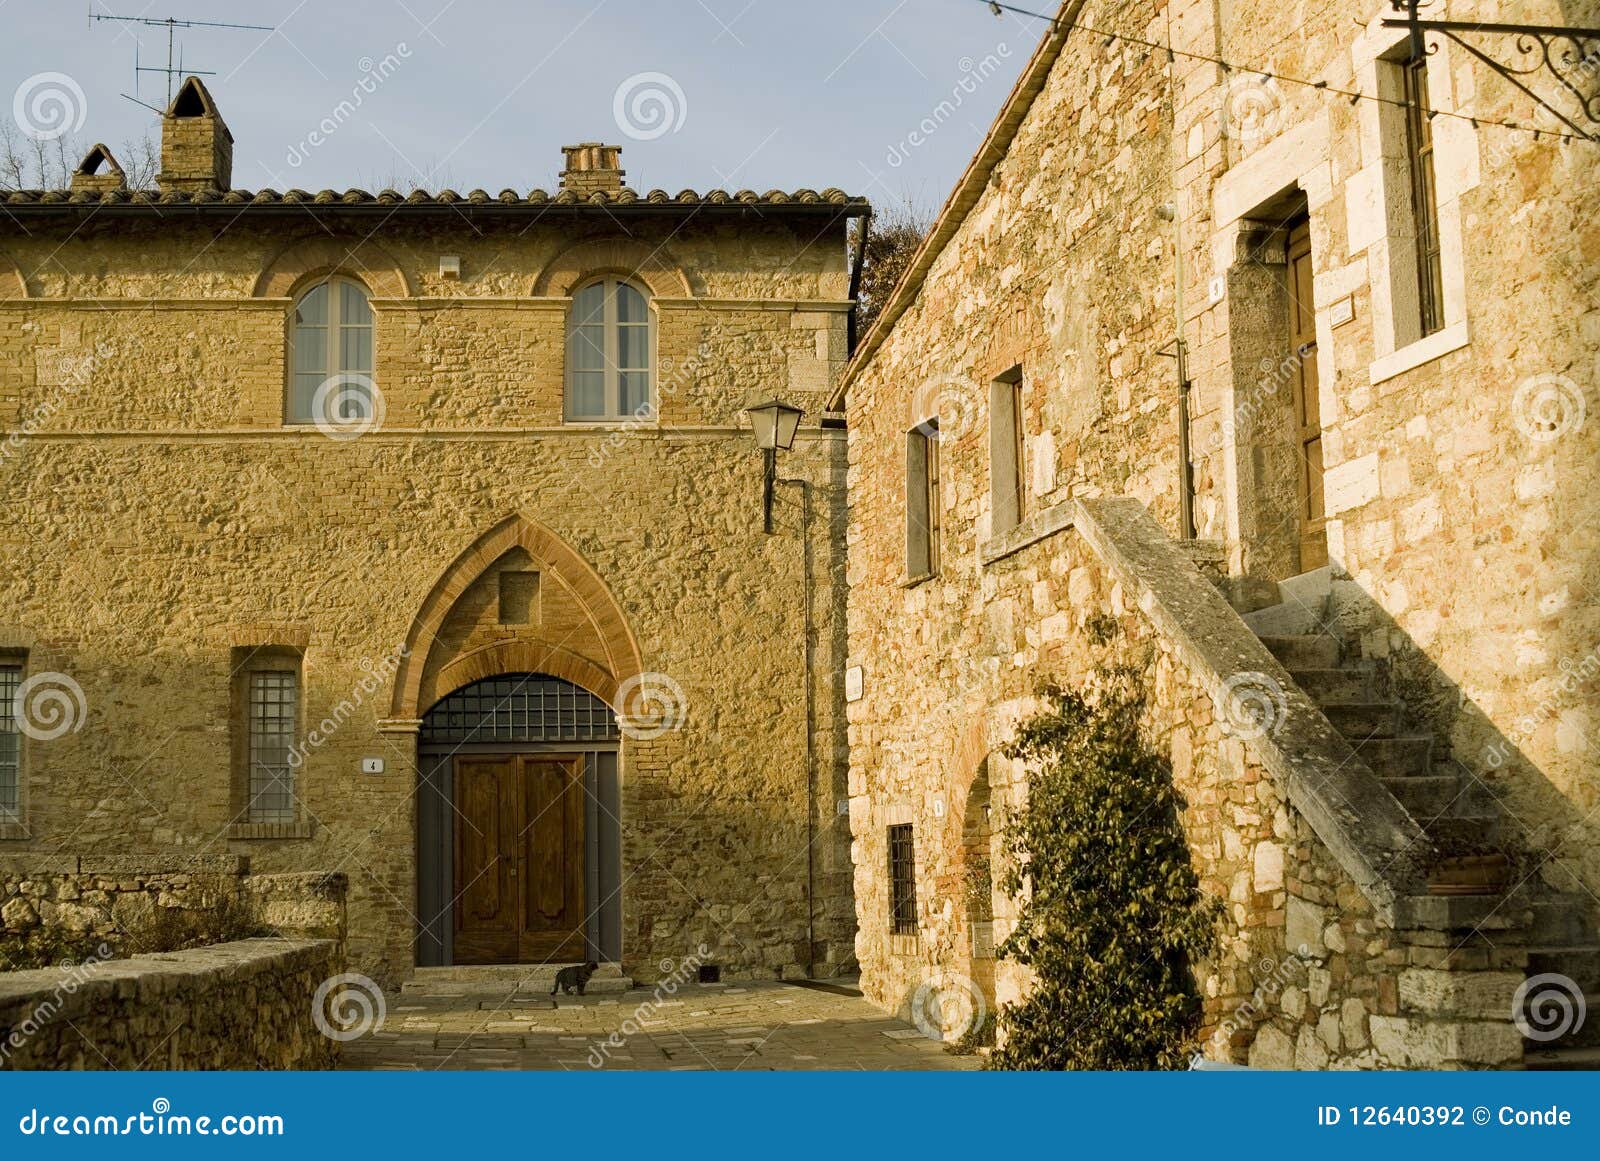 tipical houses of tuscany